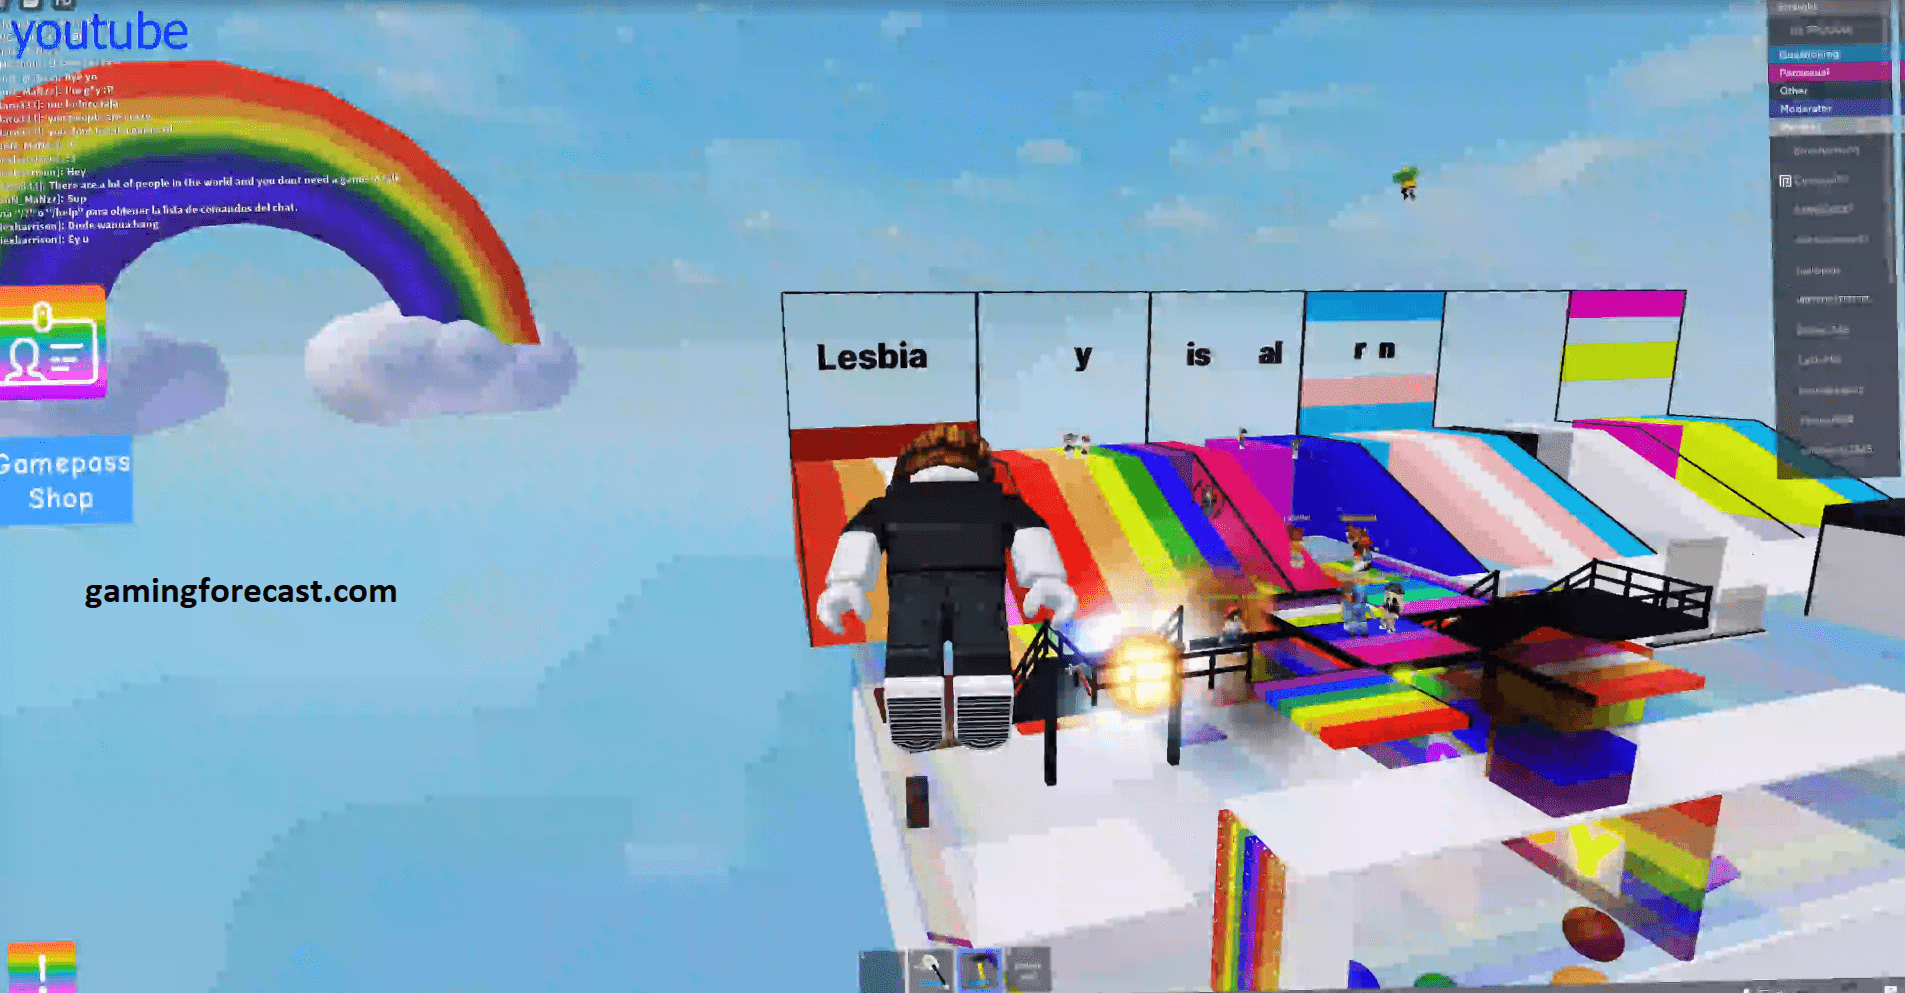 Roblox Hack Download Pc Destroy Lobby Fly Aimbot Scripts 2021 Gaming Forecast Download Free Online Game Hacks - hack roblox free download